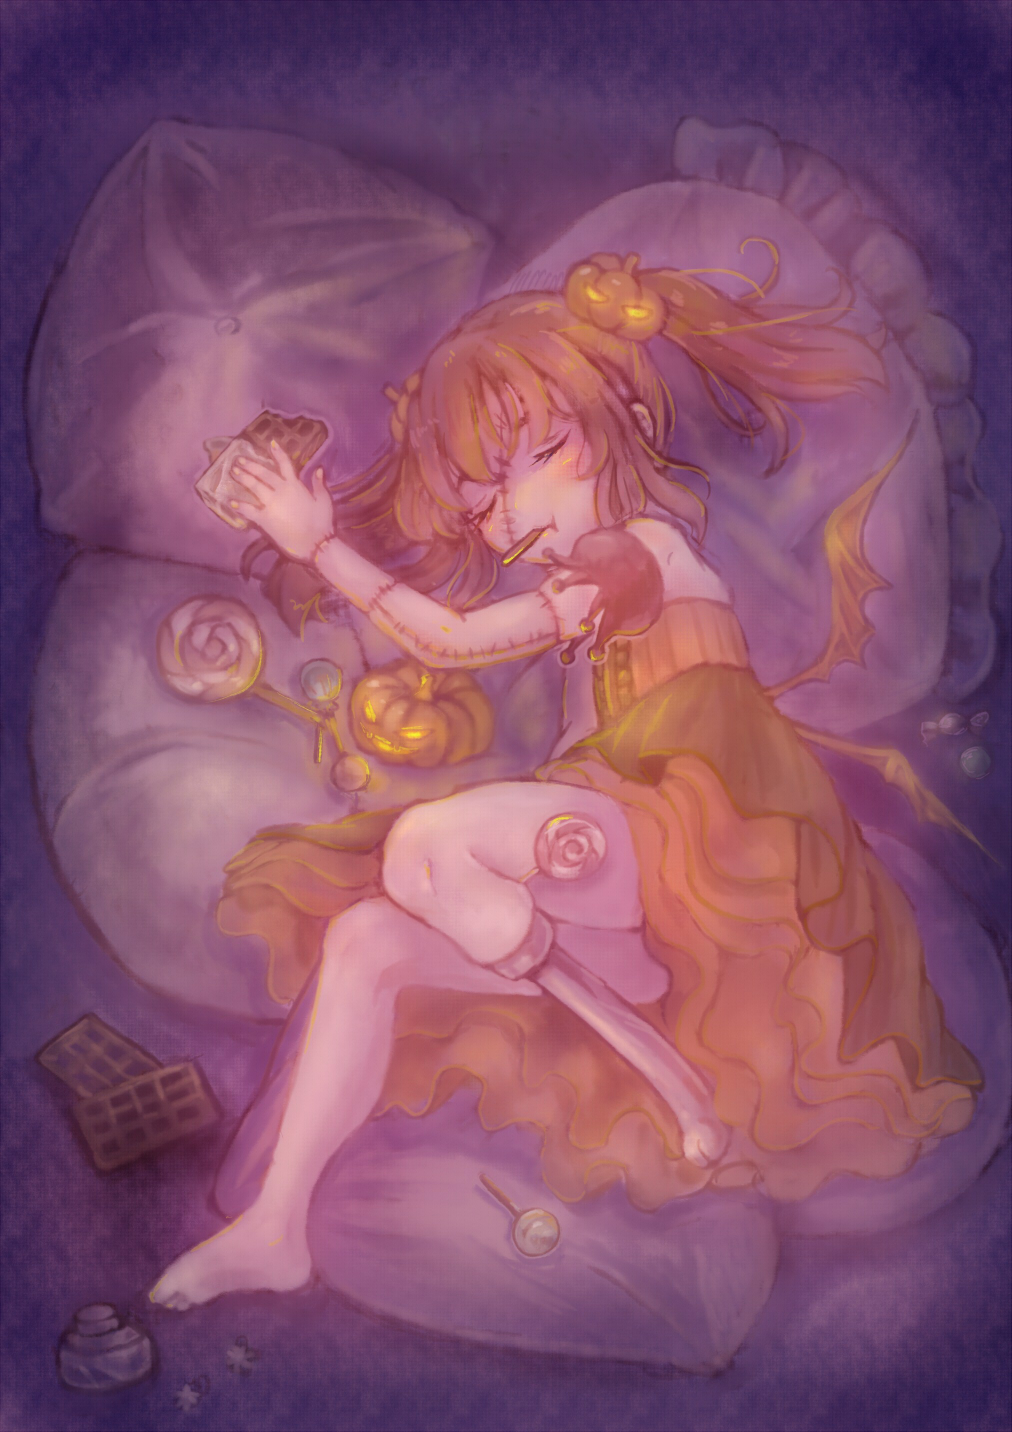 1girl amputee barefoot brown_hair candy child chocolate closed_eyes dress food hair_ornament halloween hantoumei_namako jack-o'-lantern lollipop pillow sleeping stitches twintails wings